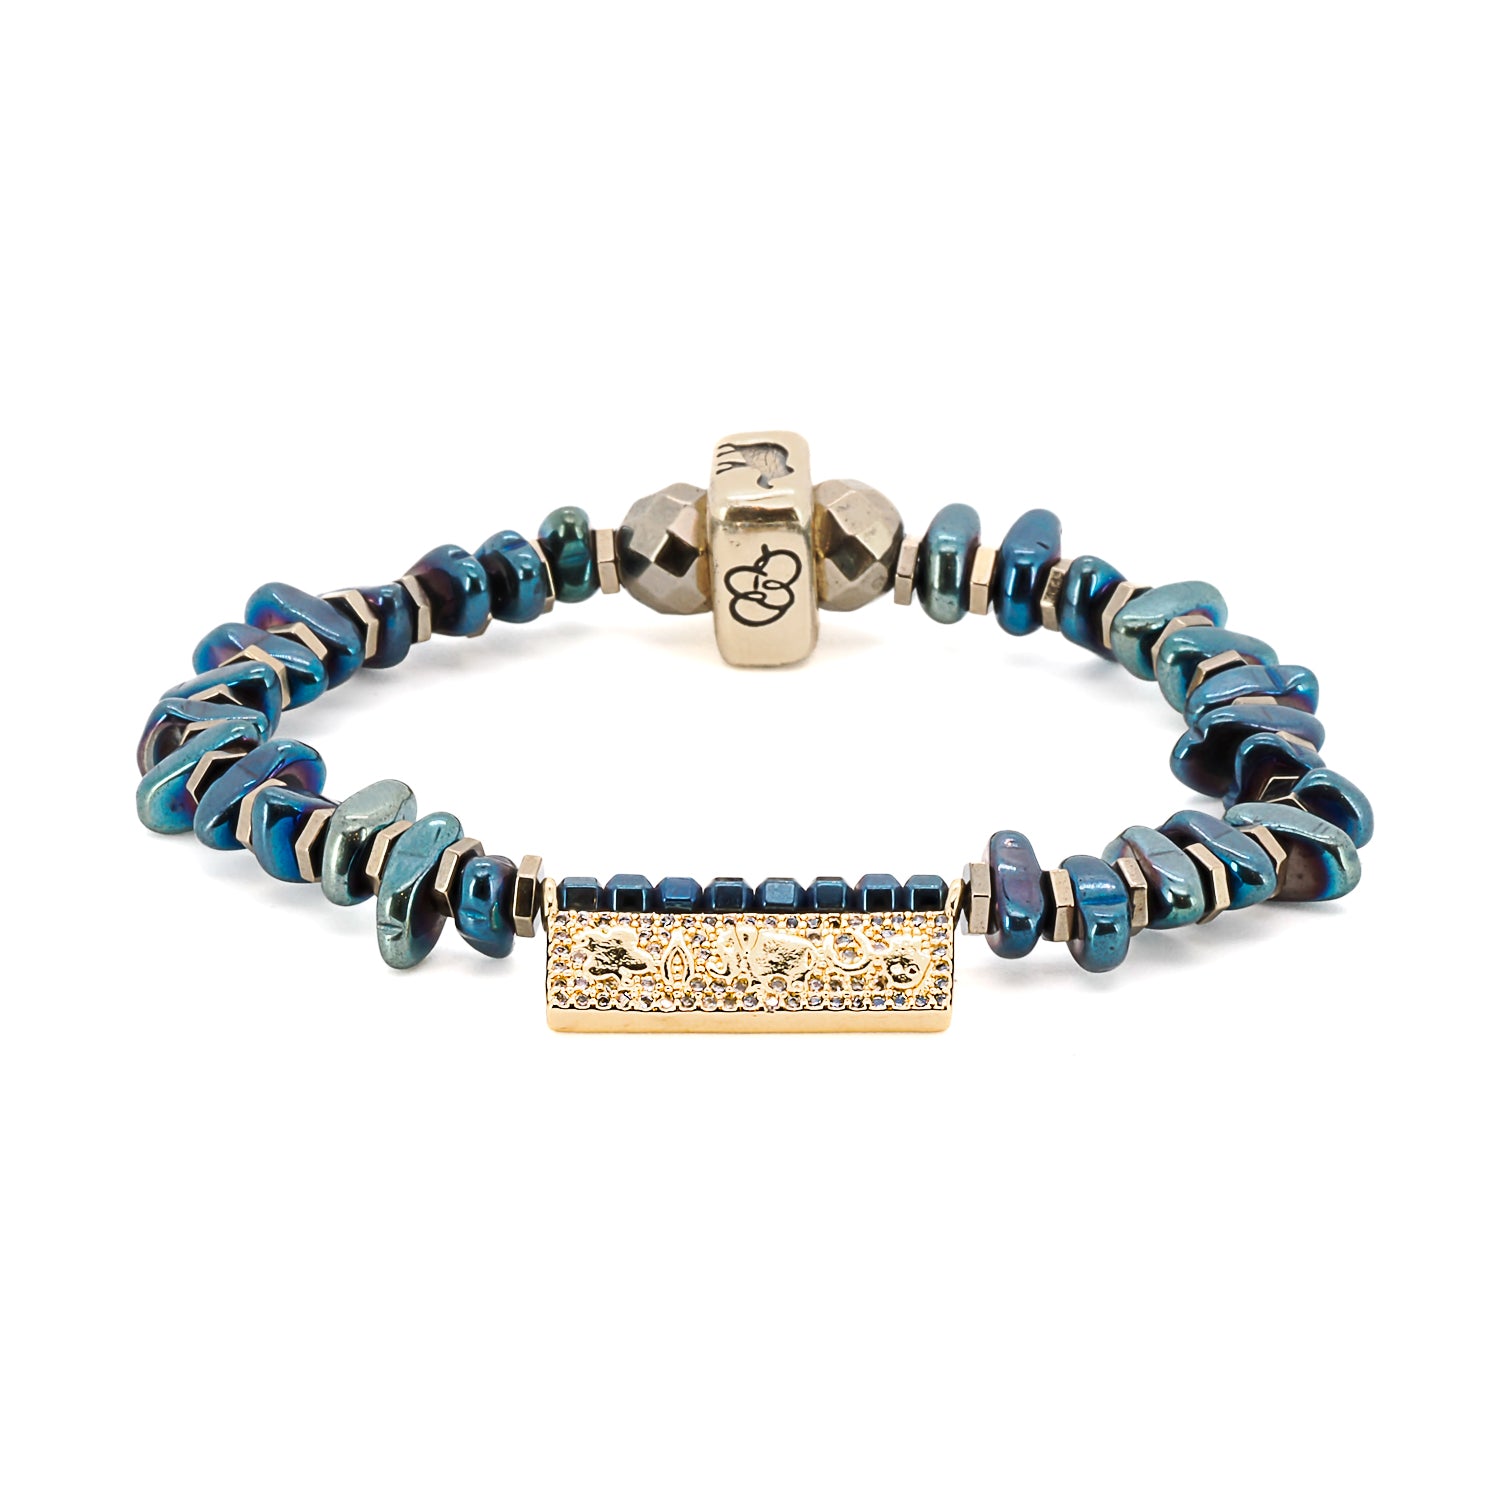 Experience the protective and luck-bringing properties of the Protection &amp; Luck Blue Hematite Bracelet, a unique and meaningful accessory.